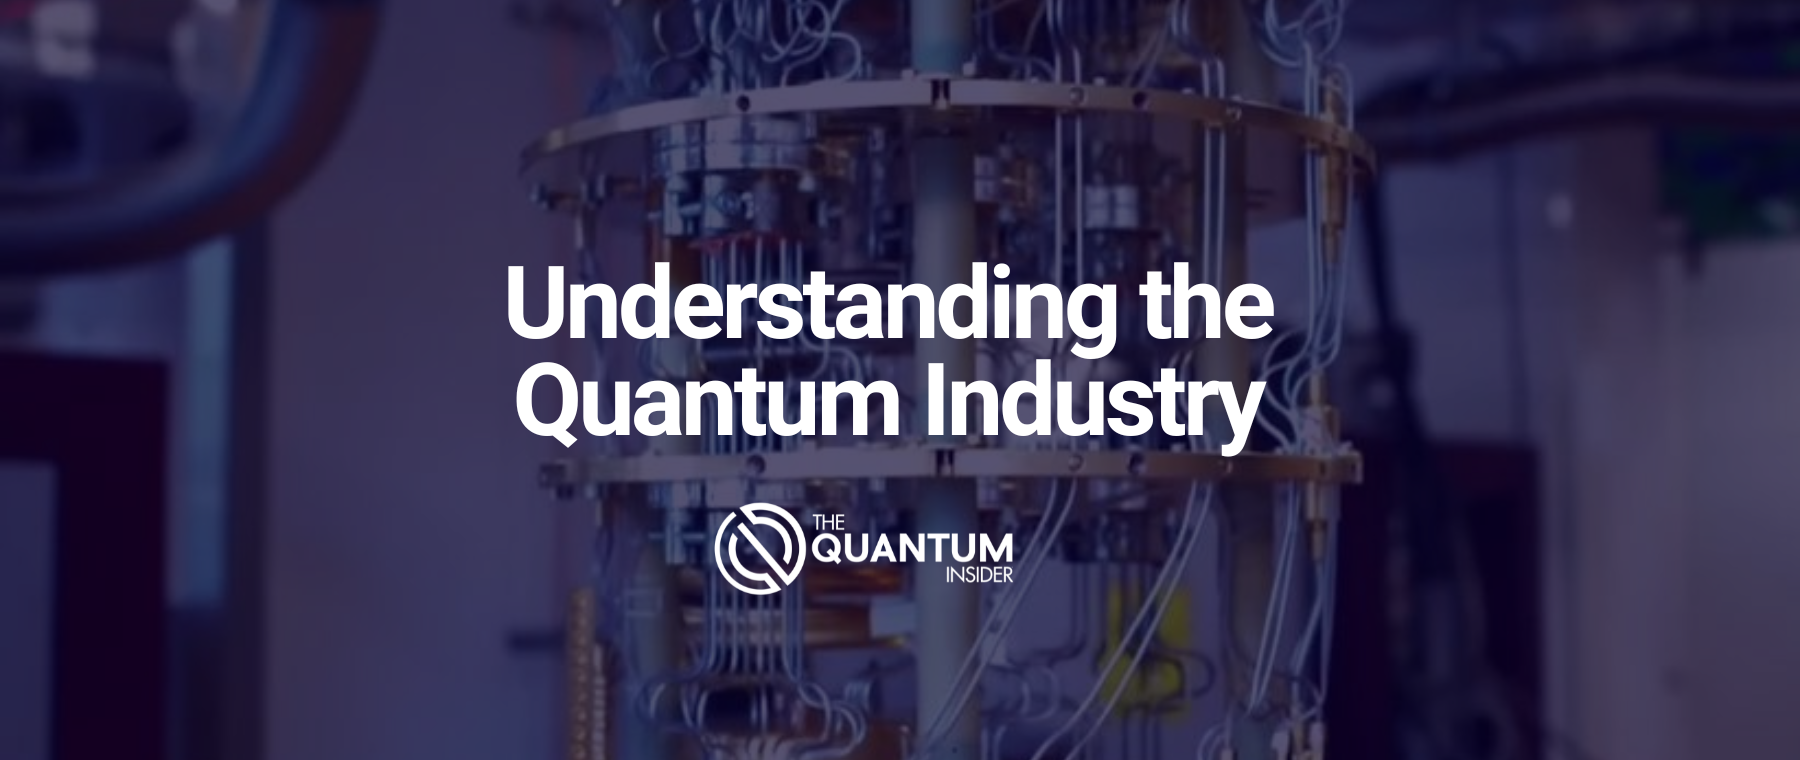 Quantum Industry Explained: Applications, Innovations & Challenges